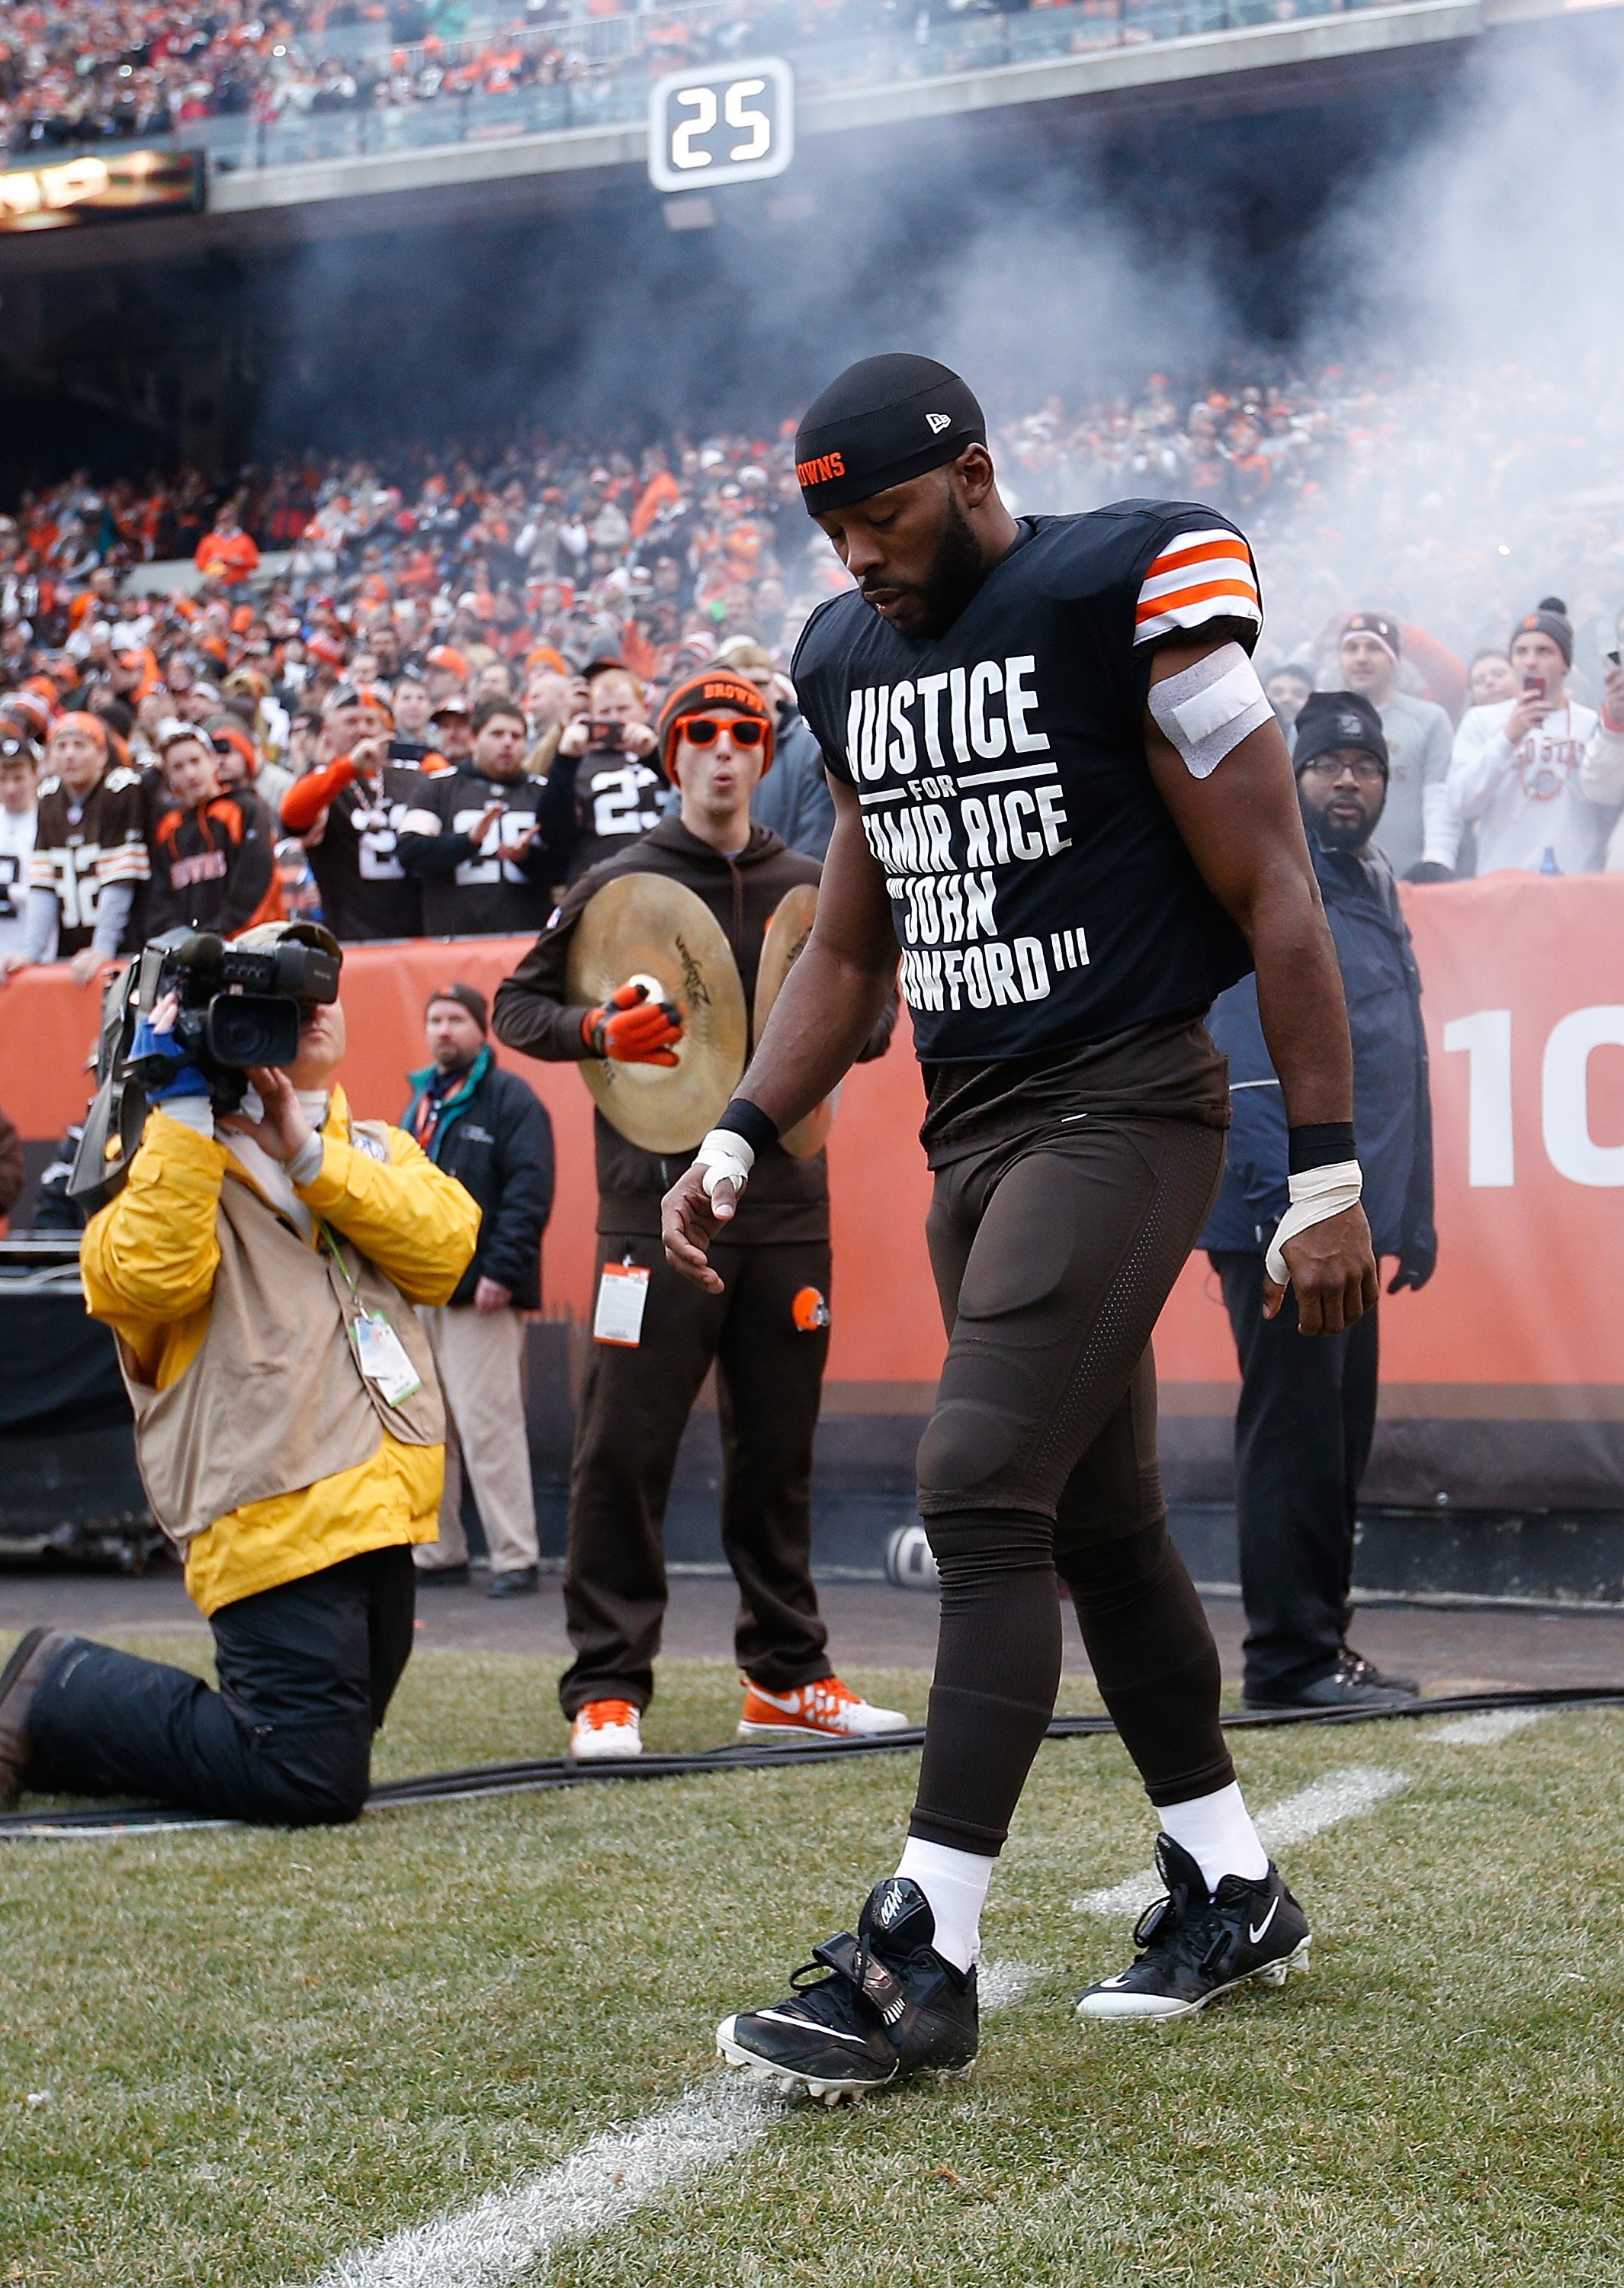 Andrew Hawkins #16 of the Cleveland Browns walks onto the field while wearing a protest shirt during introductions prior to the game against the Cincinnati Bengals at FirstEnergy Stadium on Dec. 14, 2014 in Cleveland. (Joe Robbins—Getty Images)